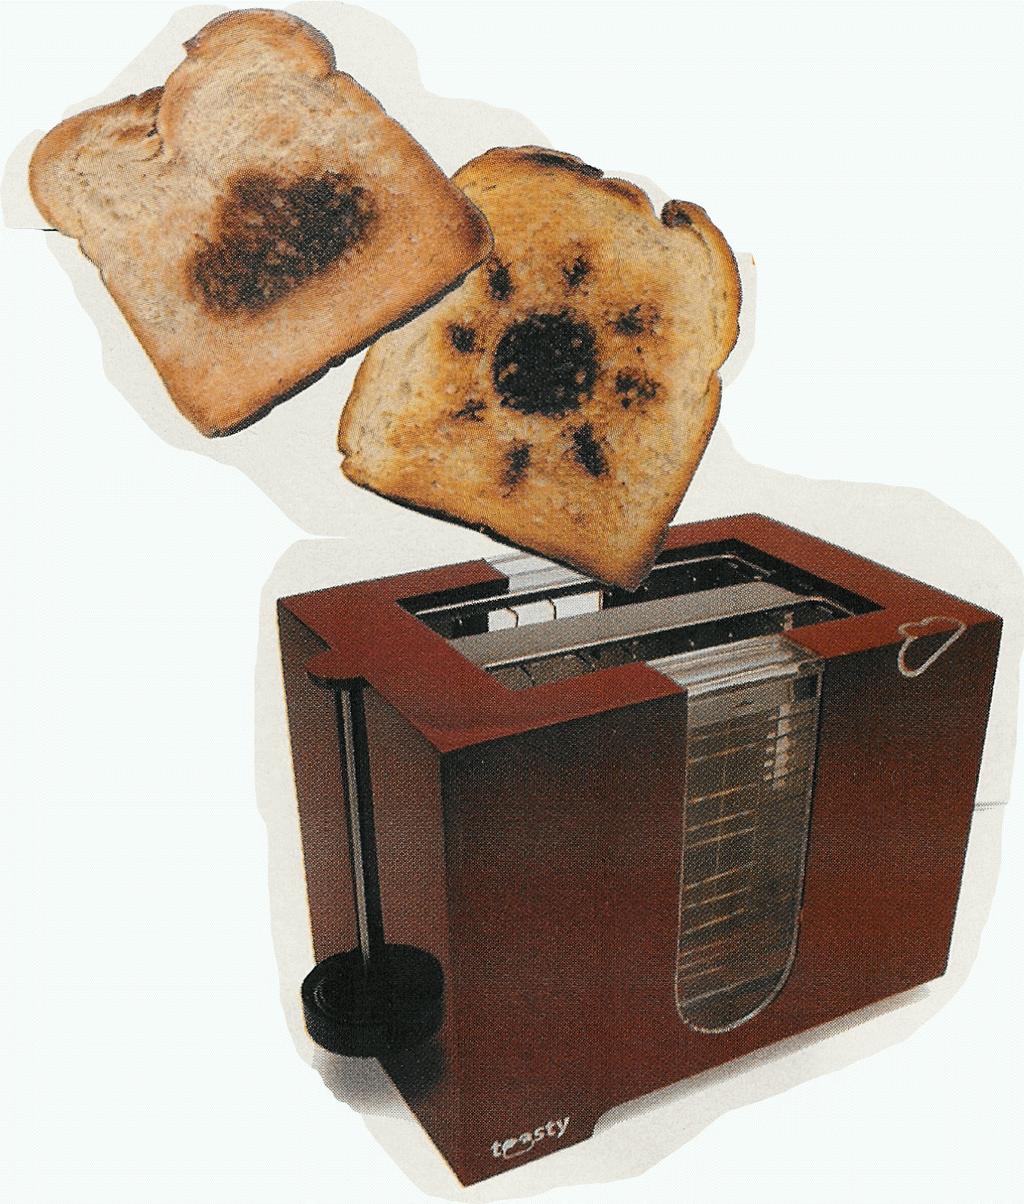 "Cool" Inter Appliances Web-enabled toaster + weather forecaster IP